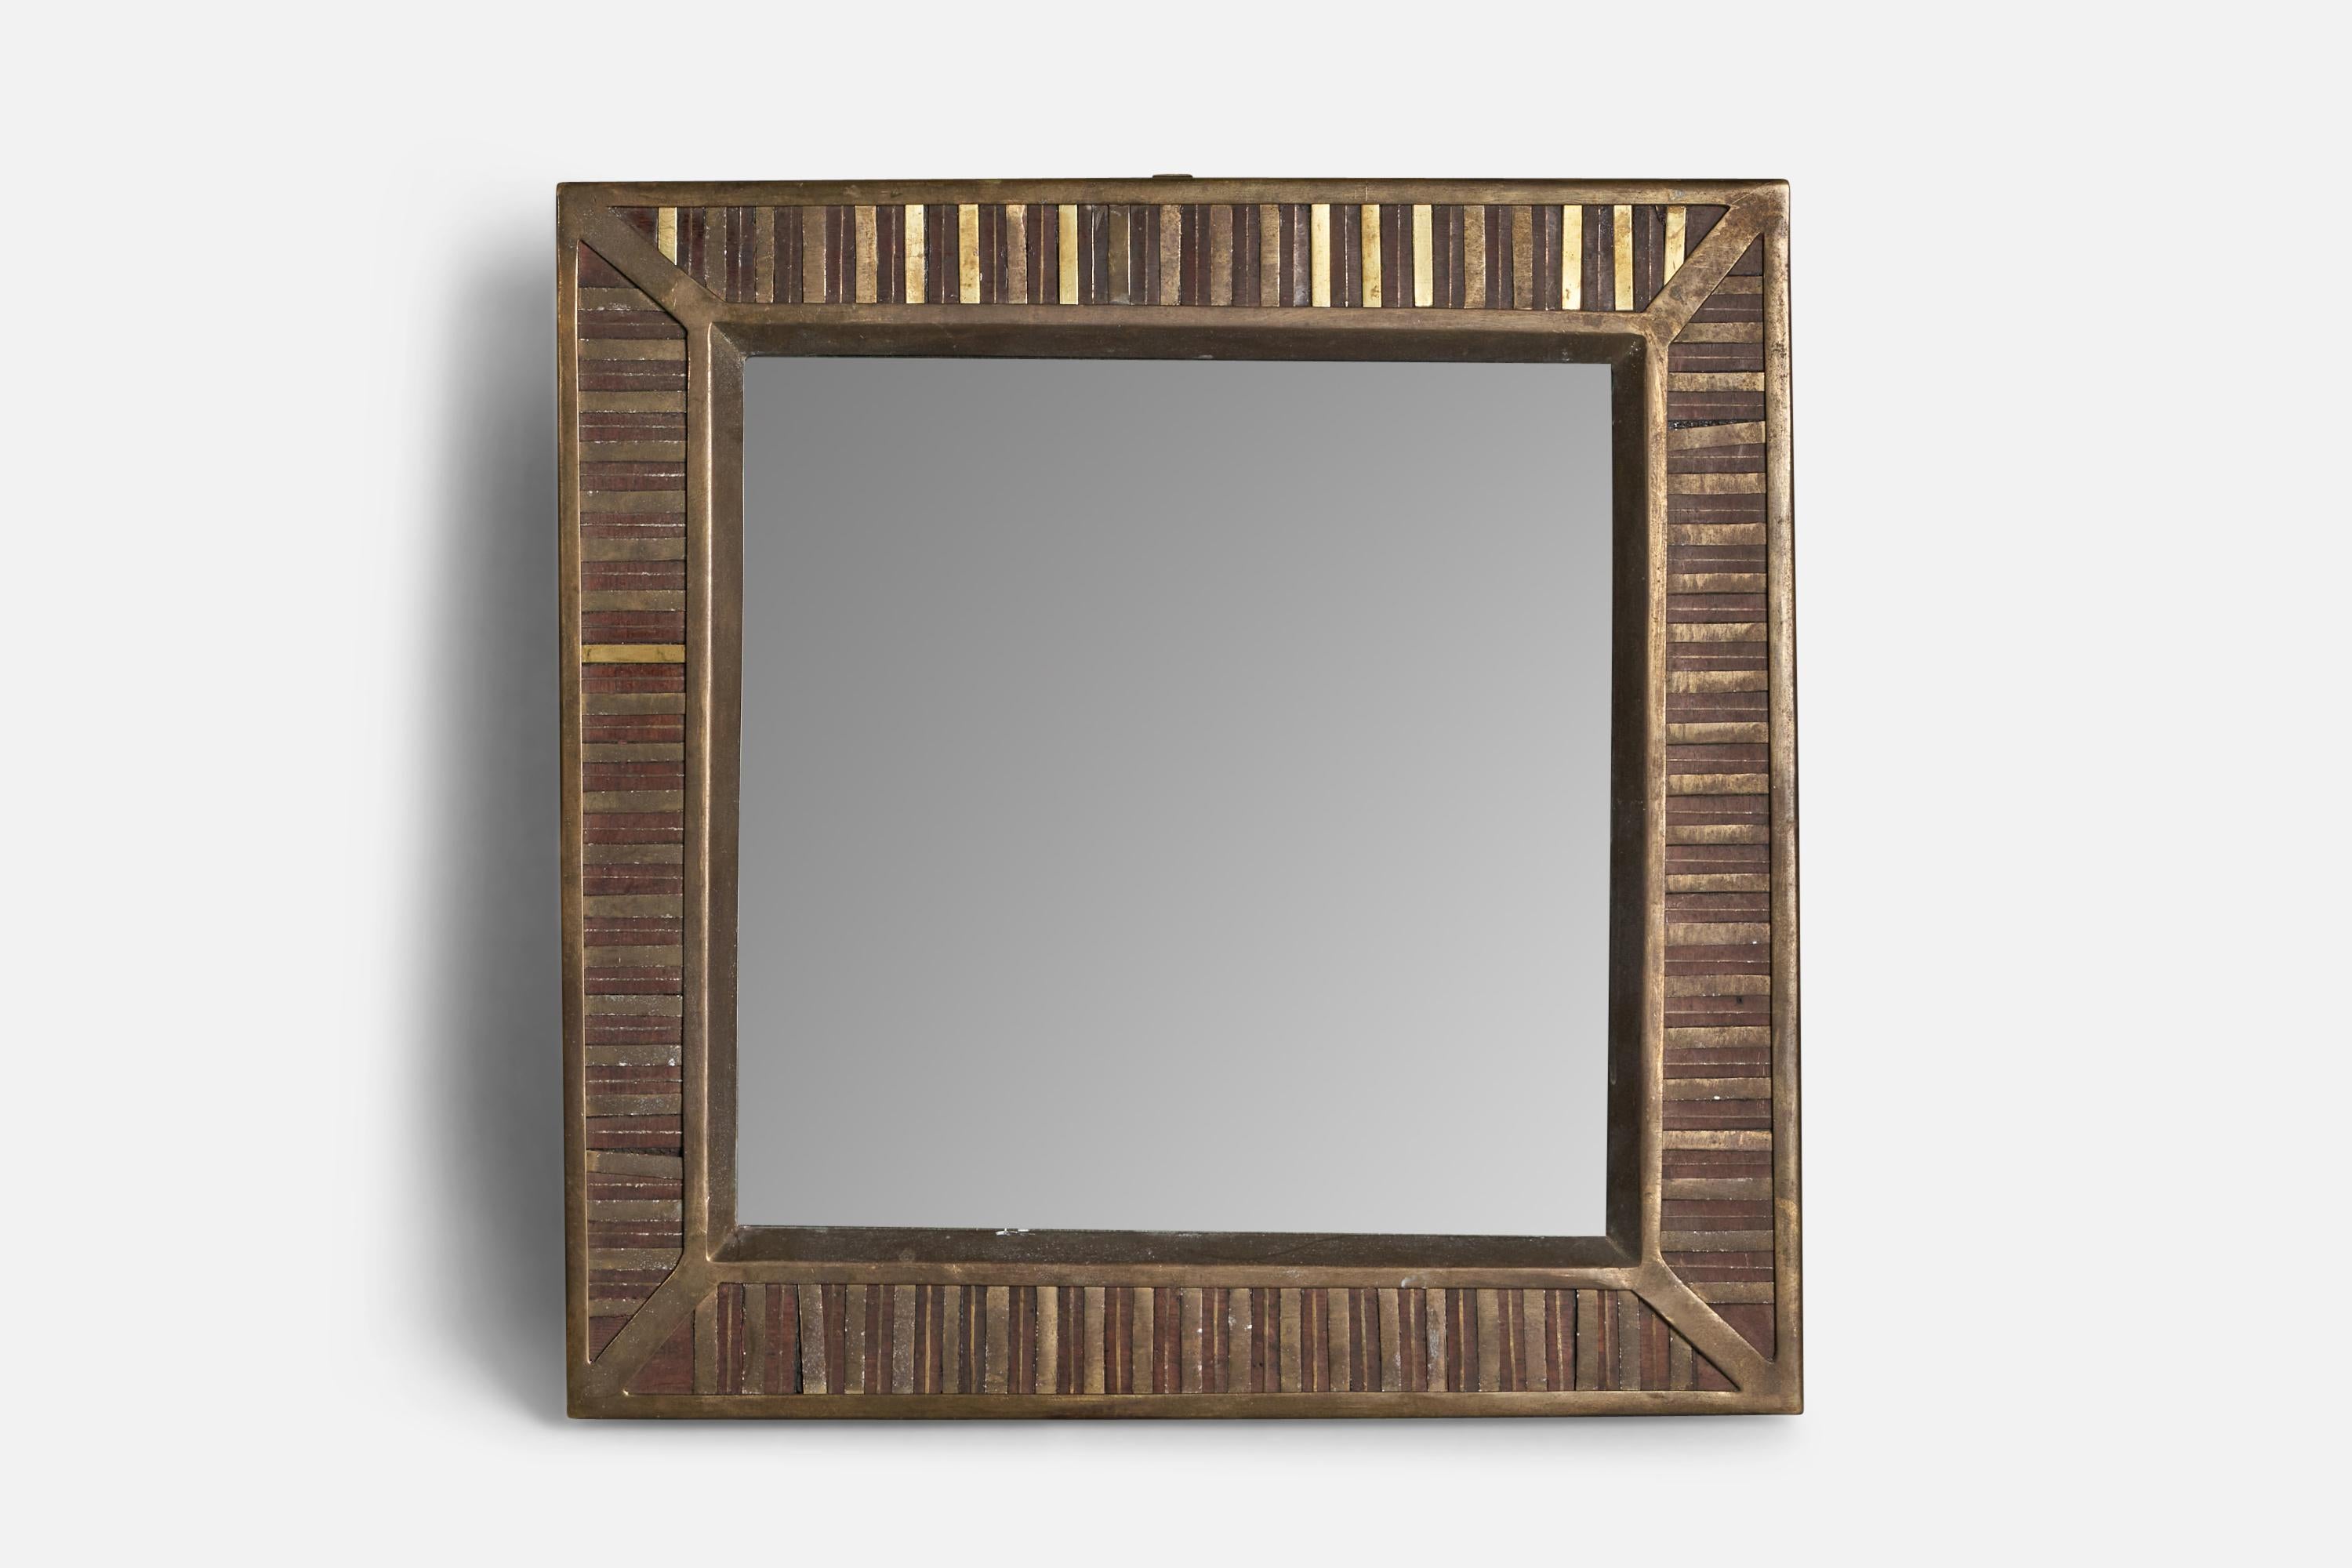 A brass table mirror with inlayed decoration, designed and produced in Italy, c. 1930s.

Stand adds 4.75